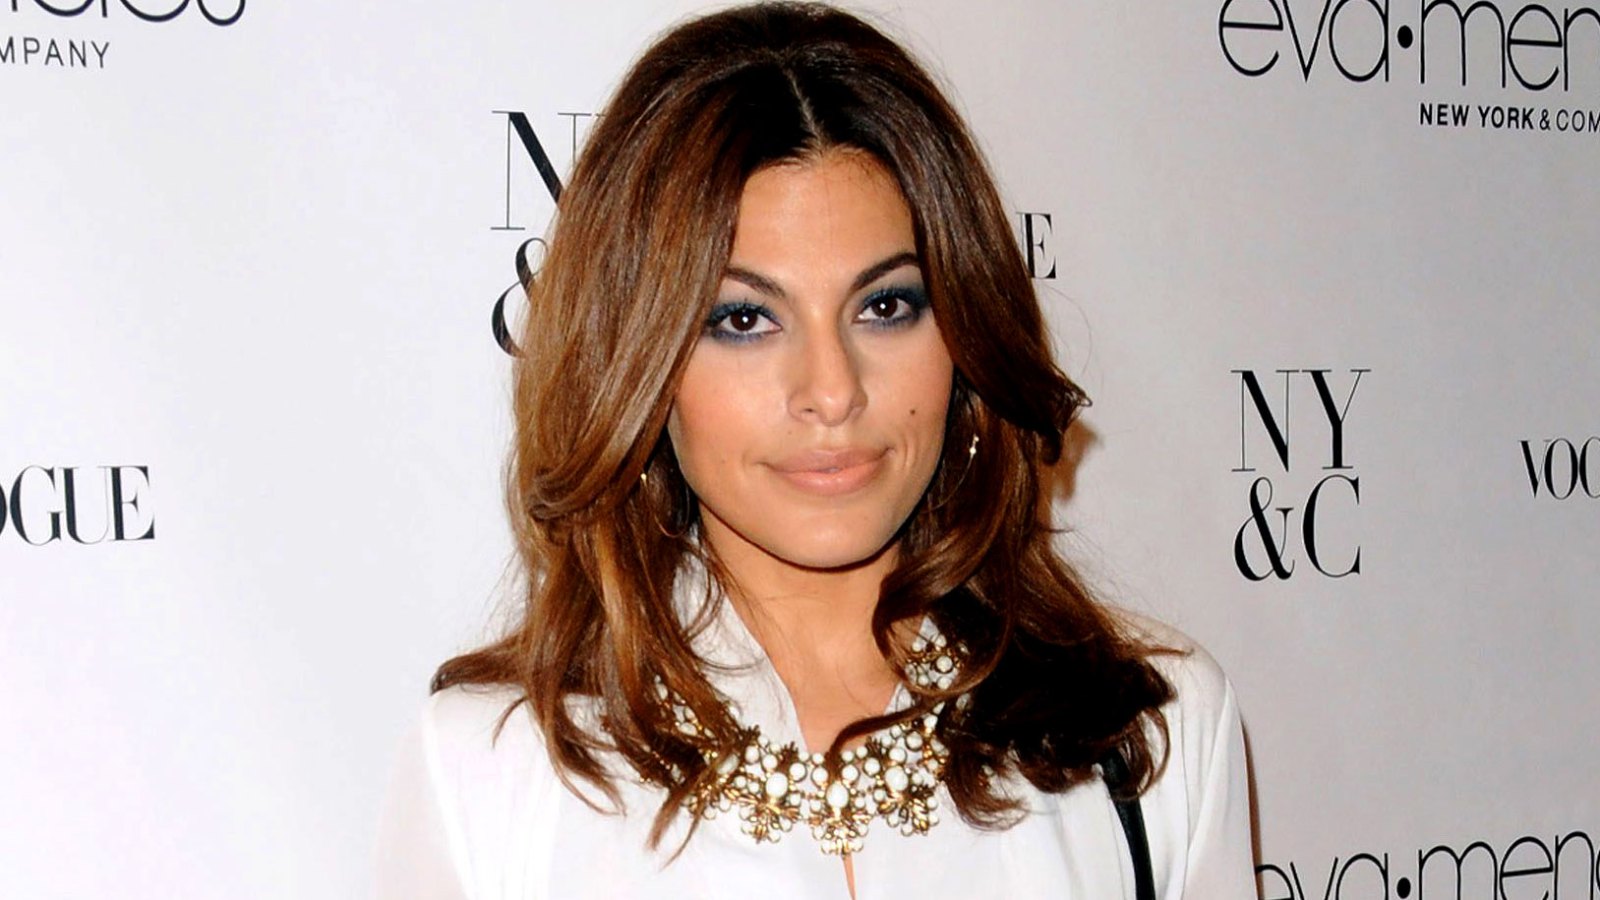 Eva Mendes Offers Kind Words to Instagram Fan Who Criticized Her Style